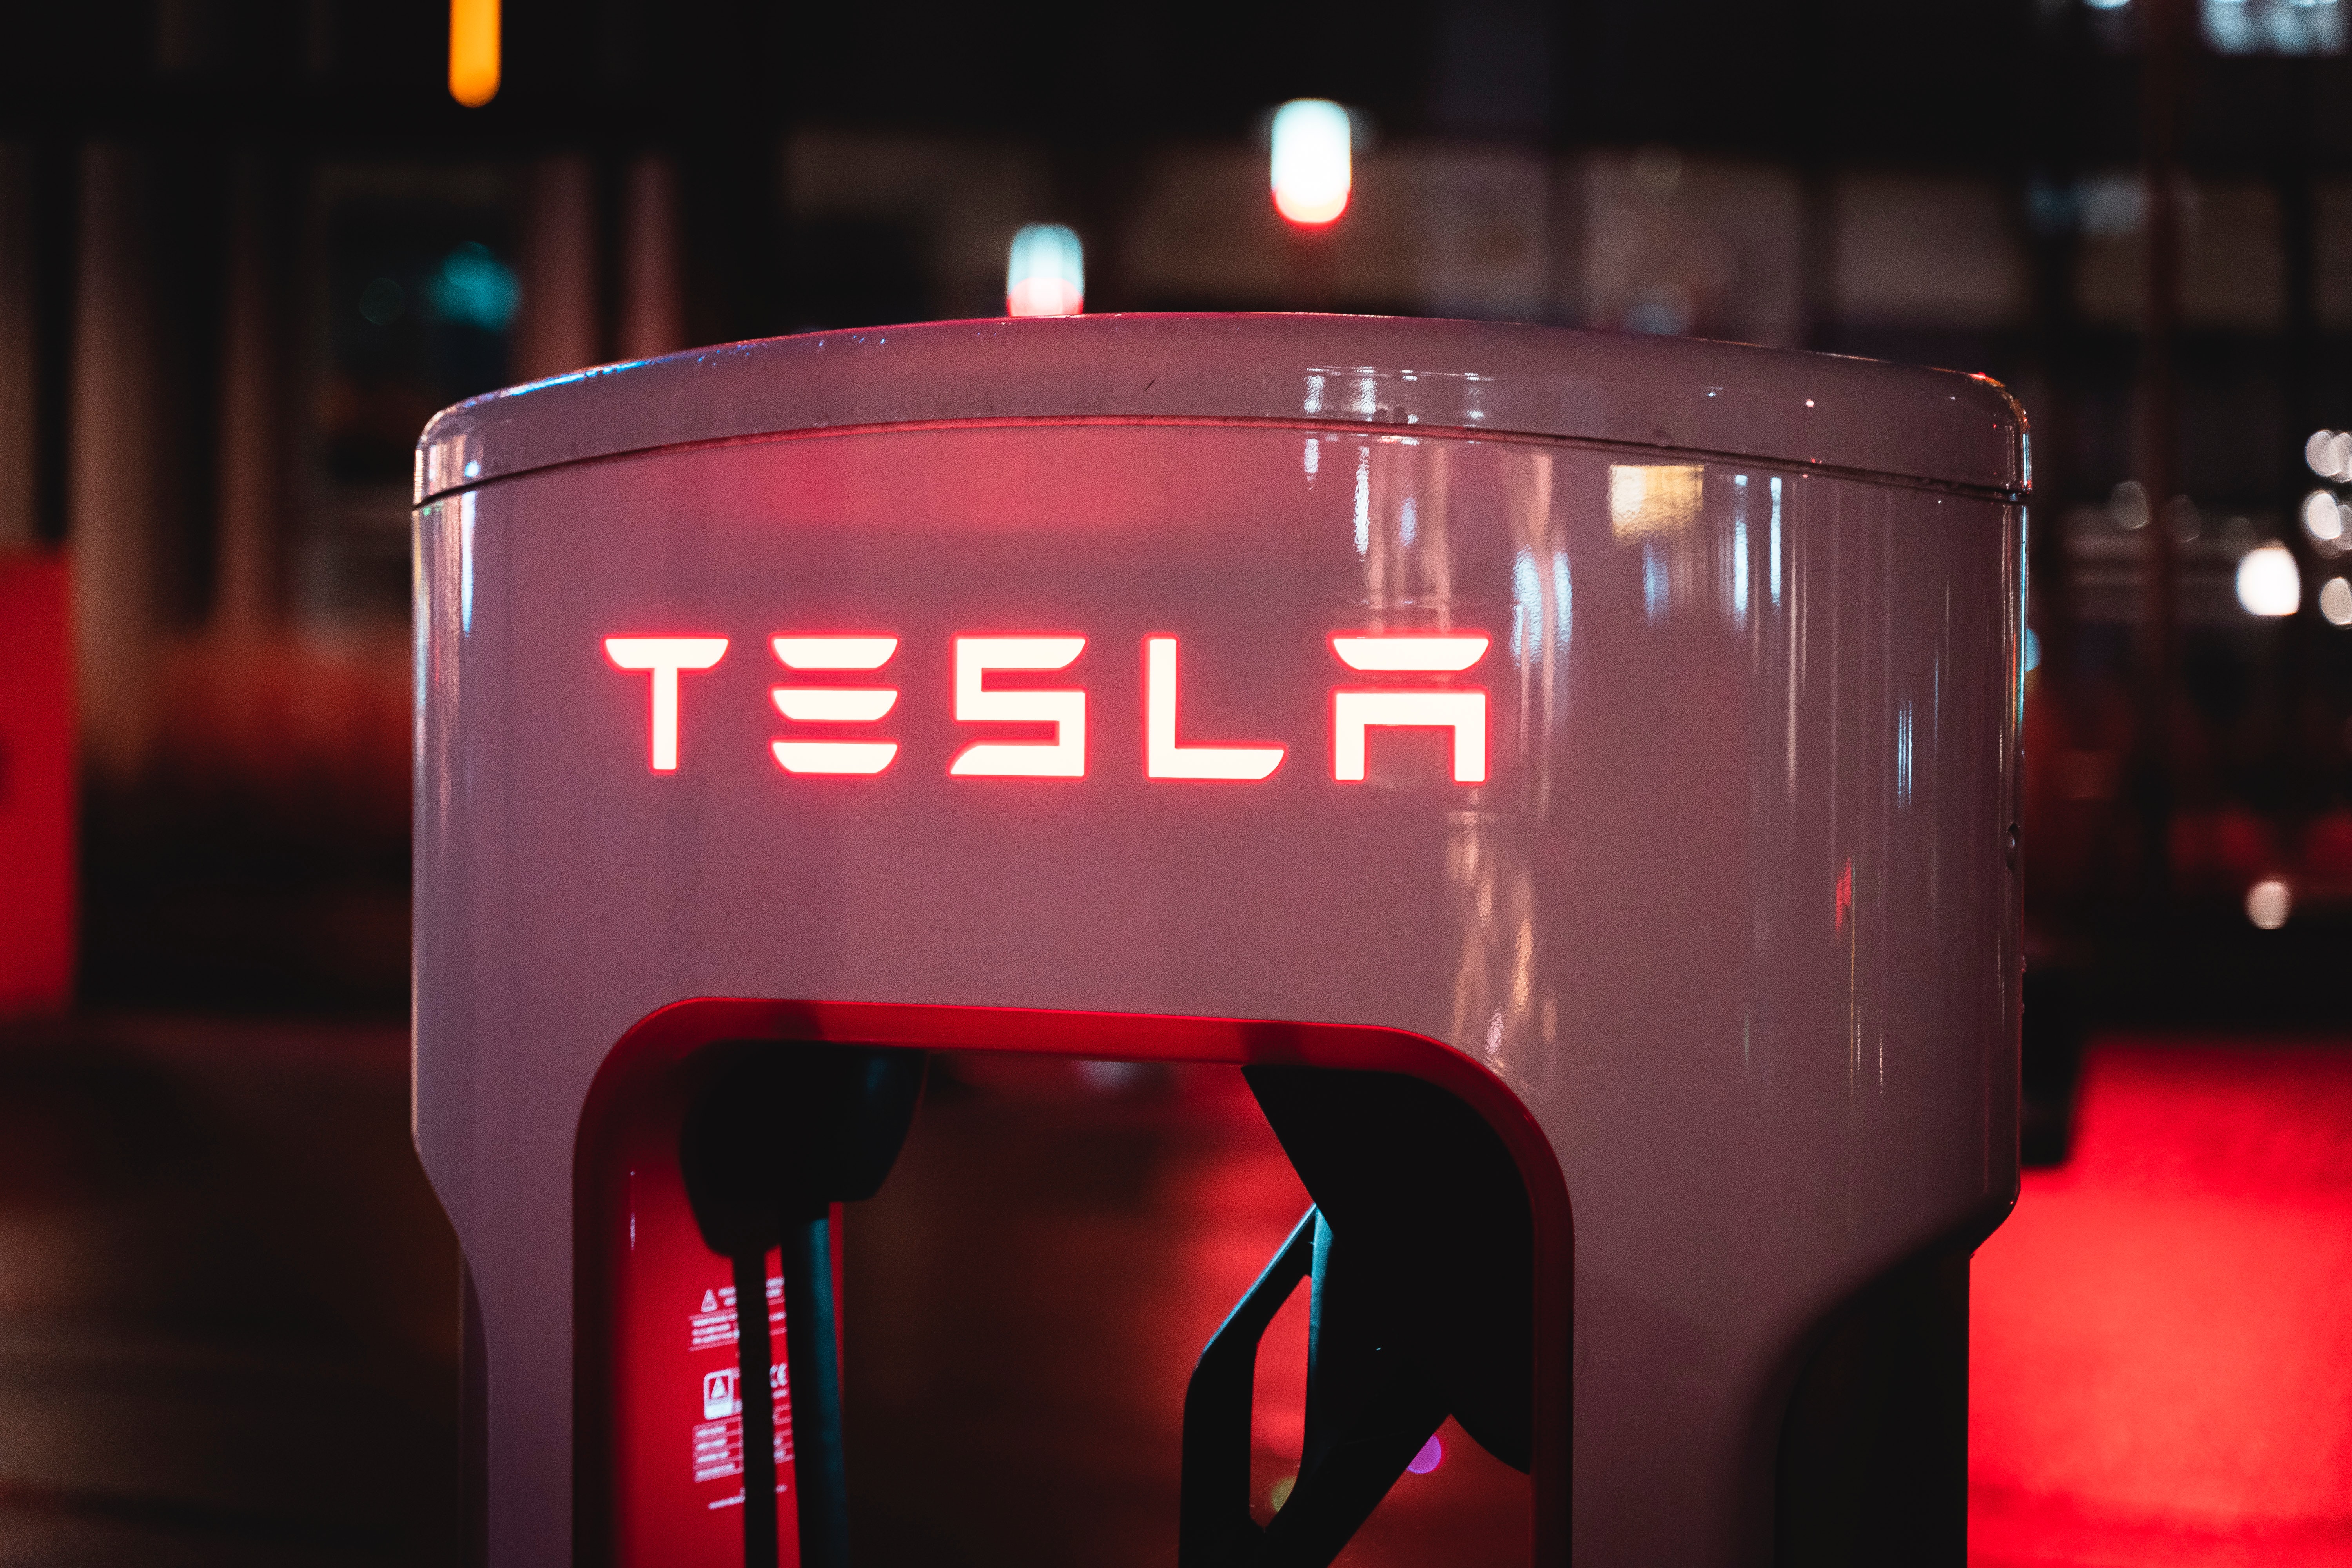 How The Tesla Electric Car Has Shifted the Market